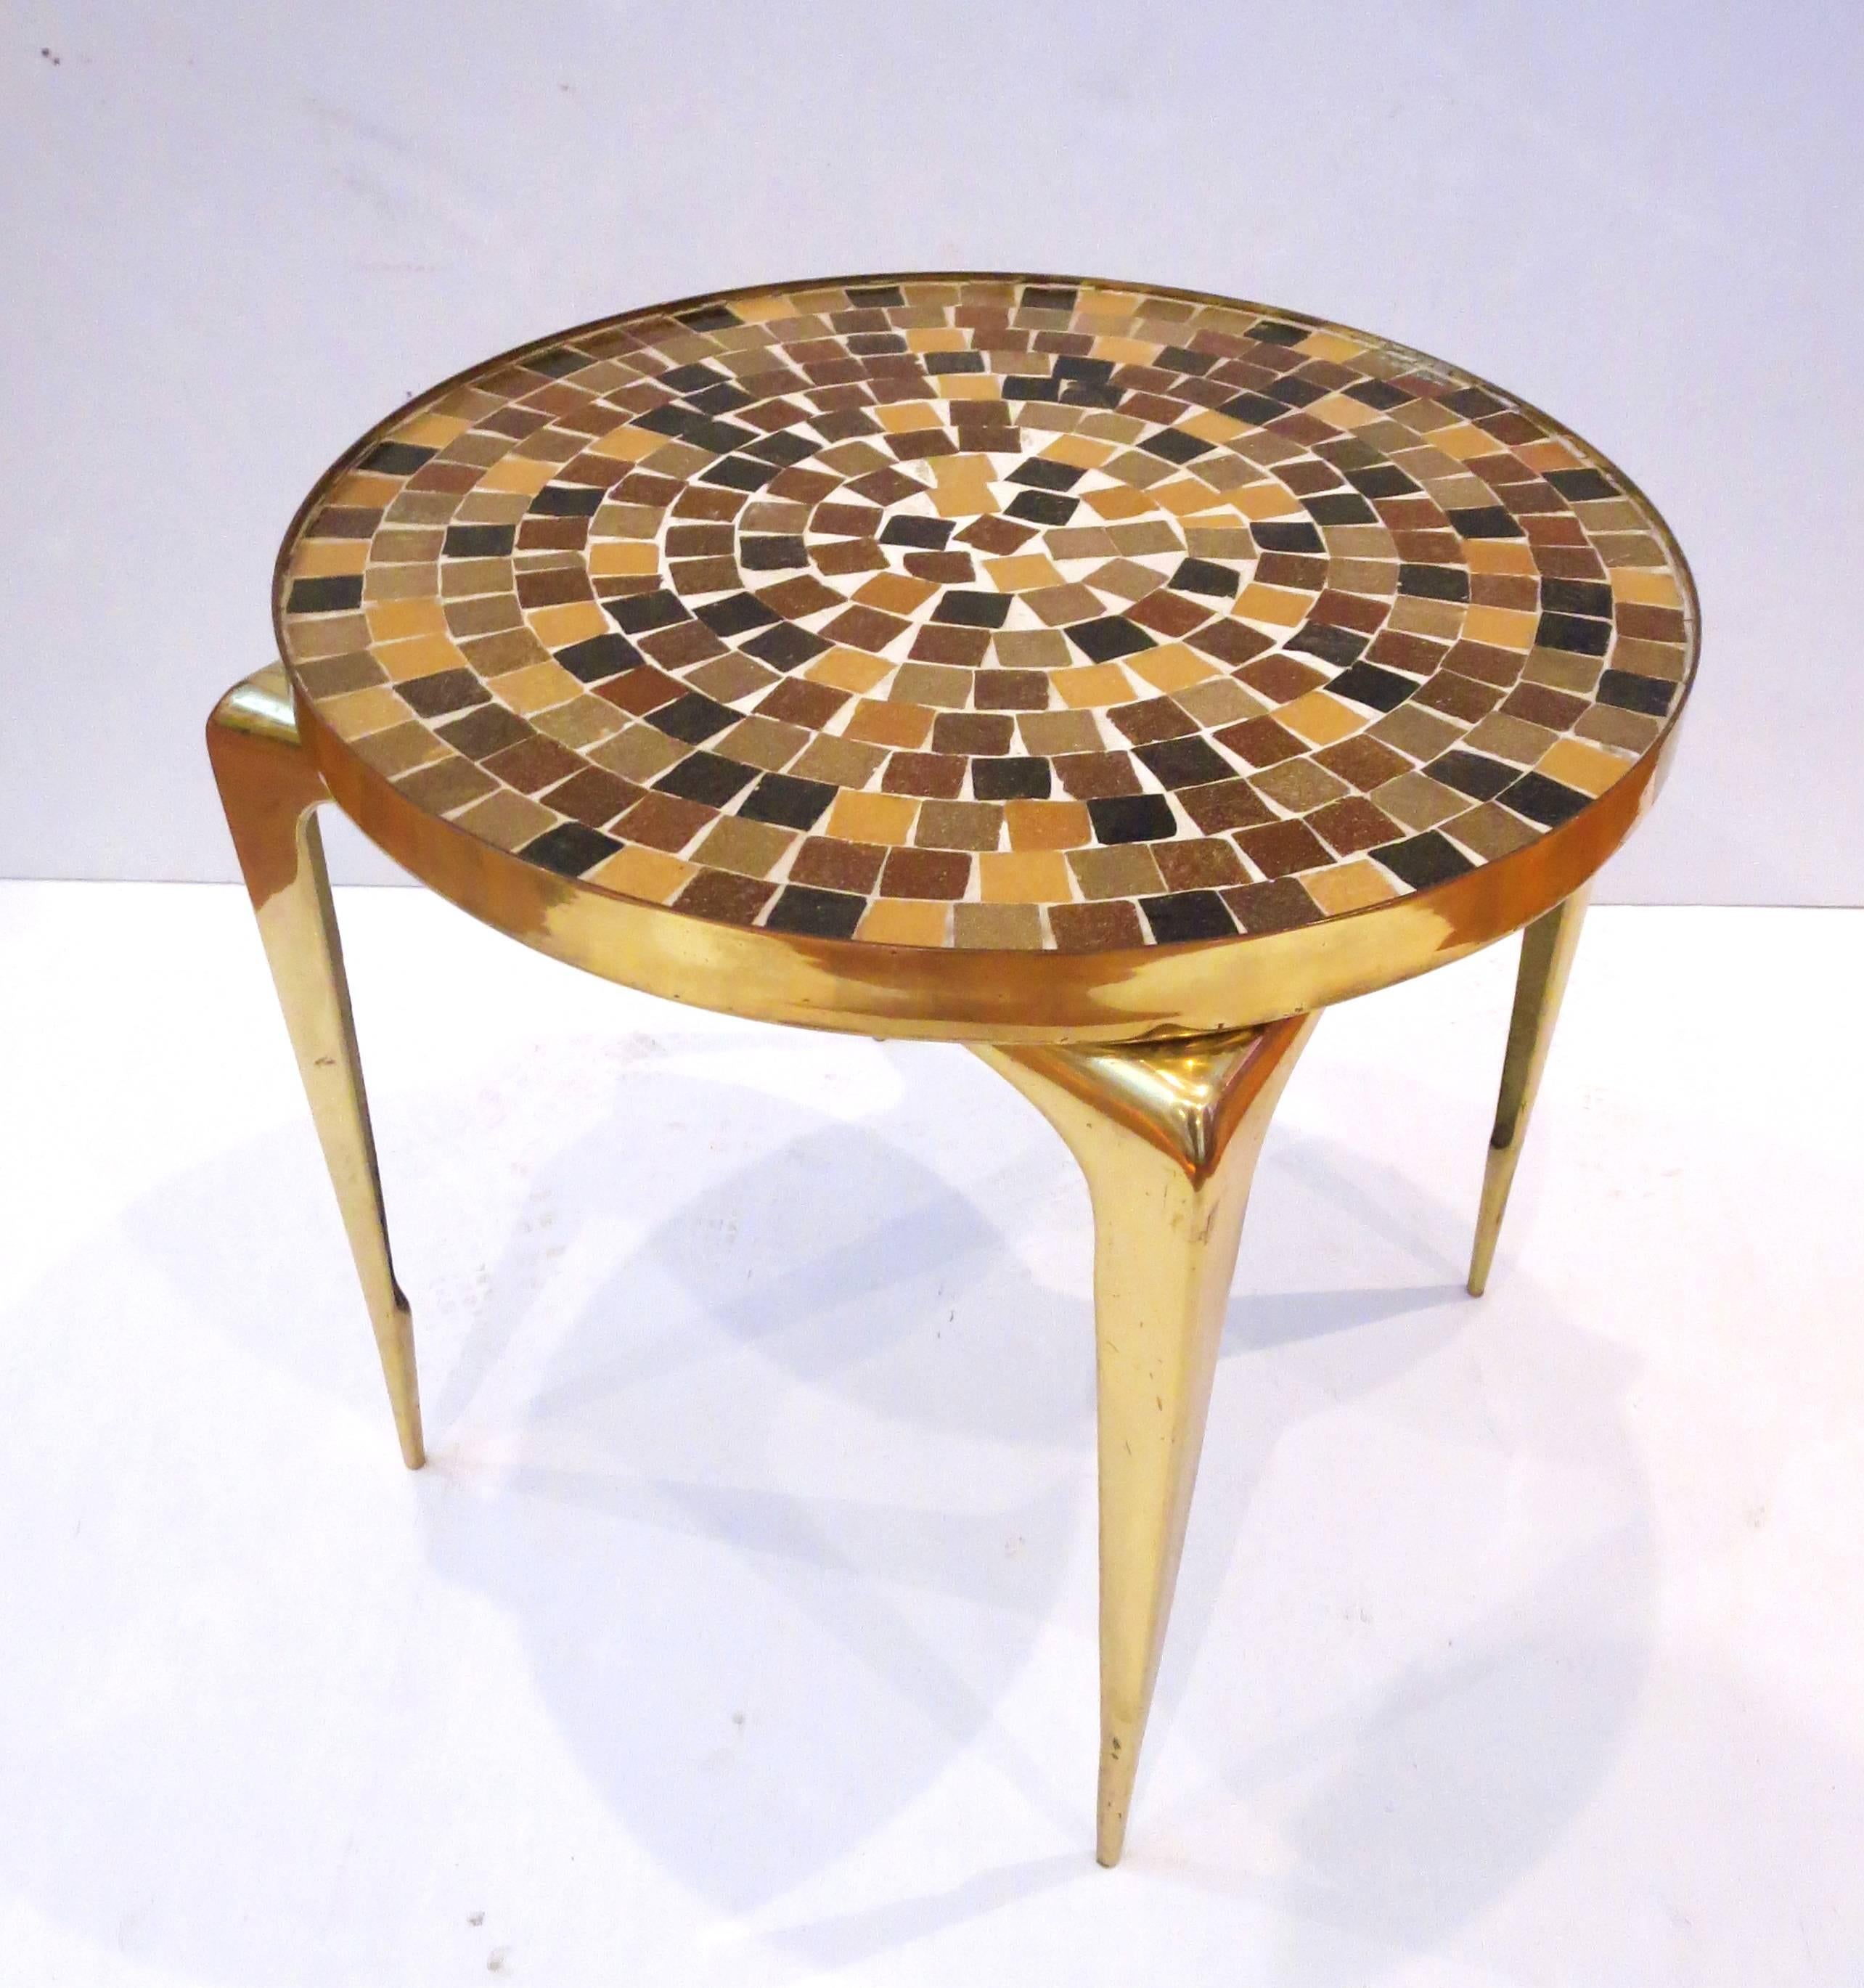 Japanese 1950s Italian Mid-Century Modern Brass and Mosaic/Tile Top Small Cocktail Table